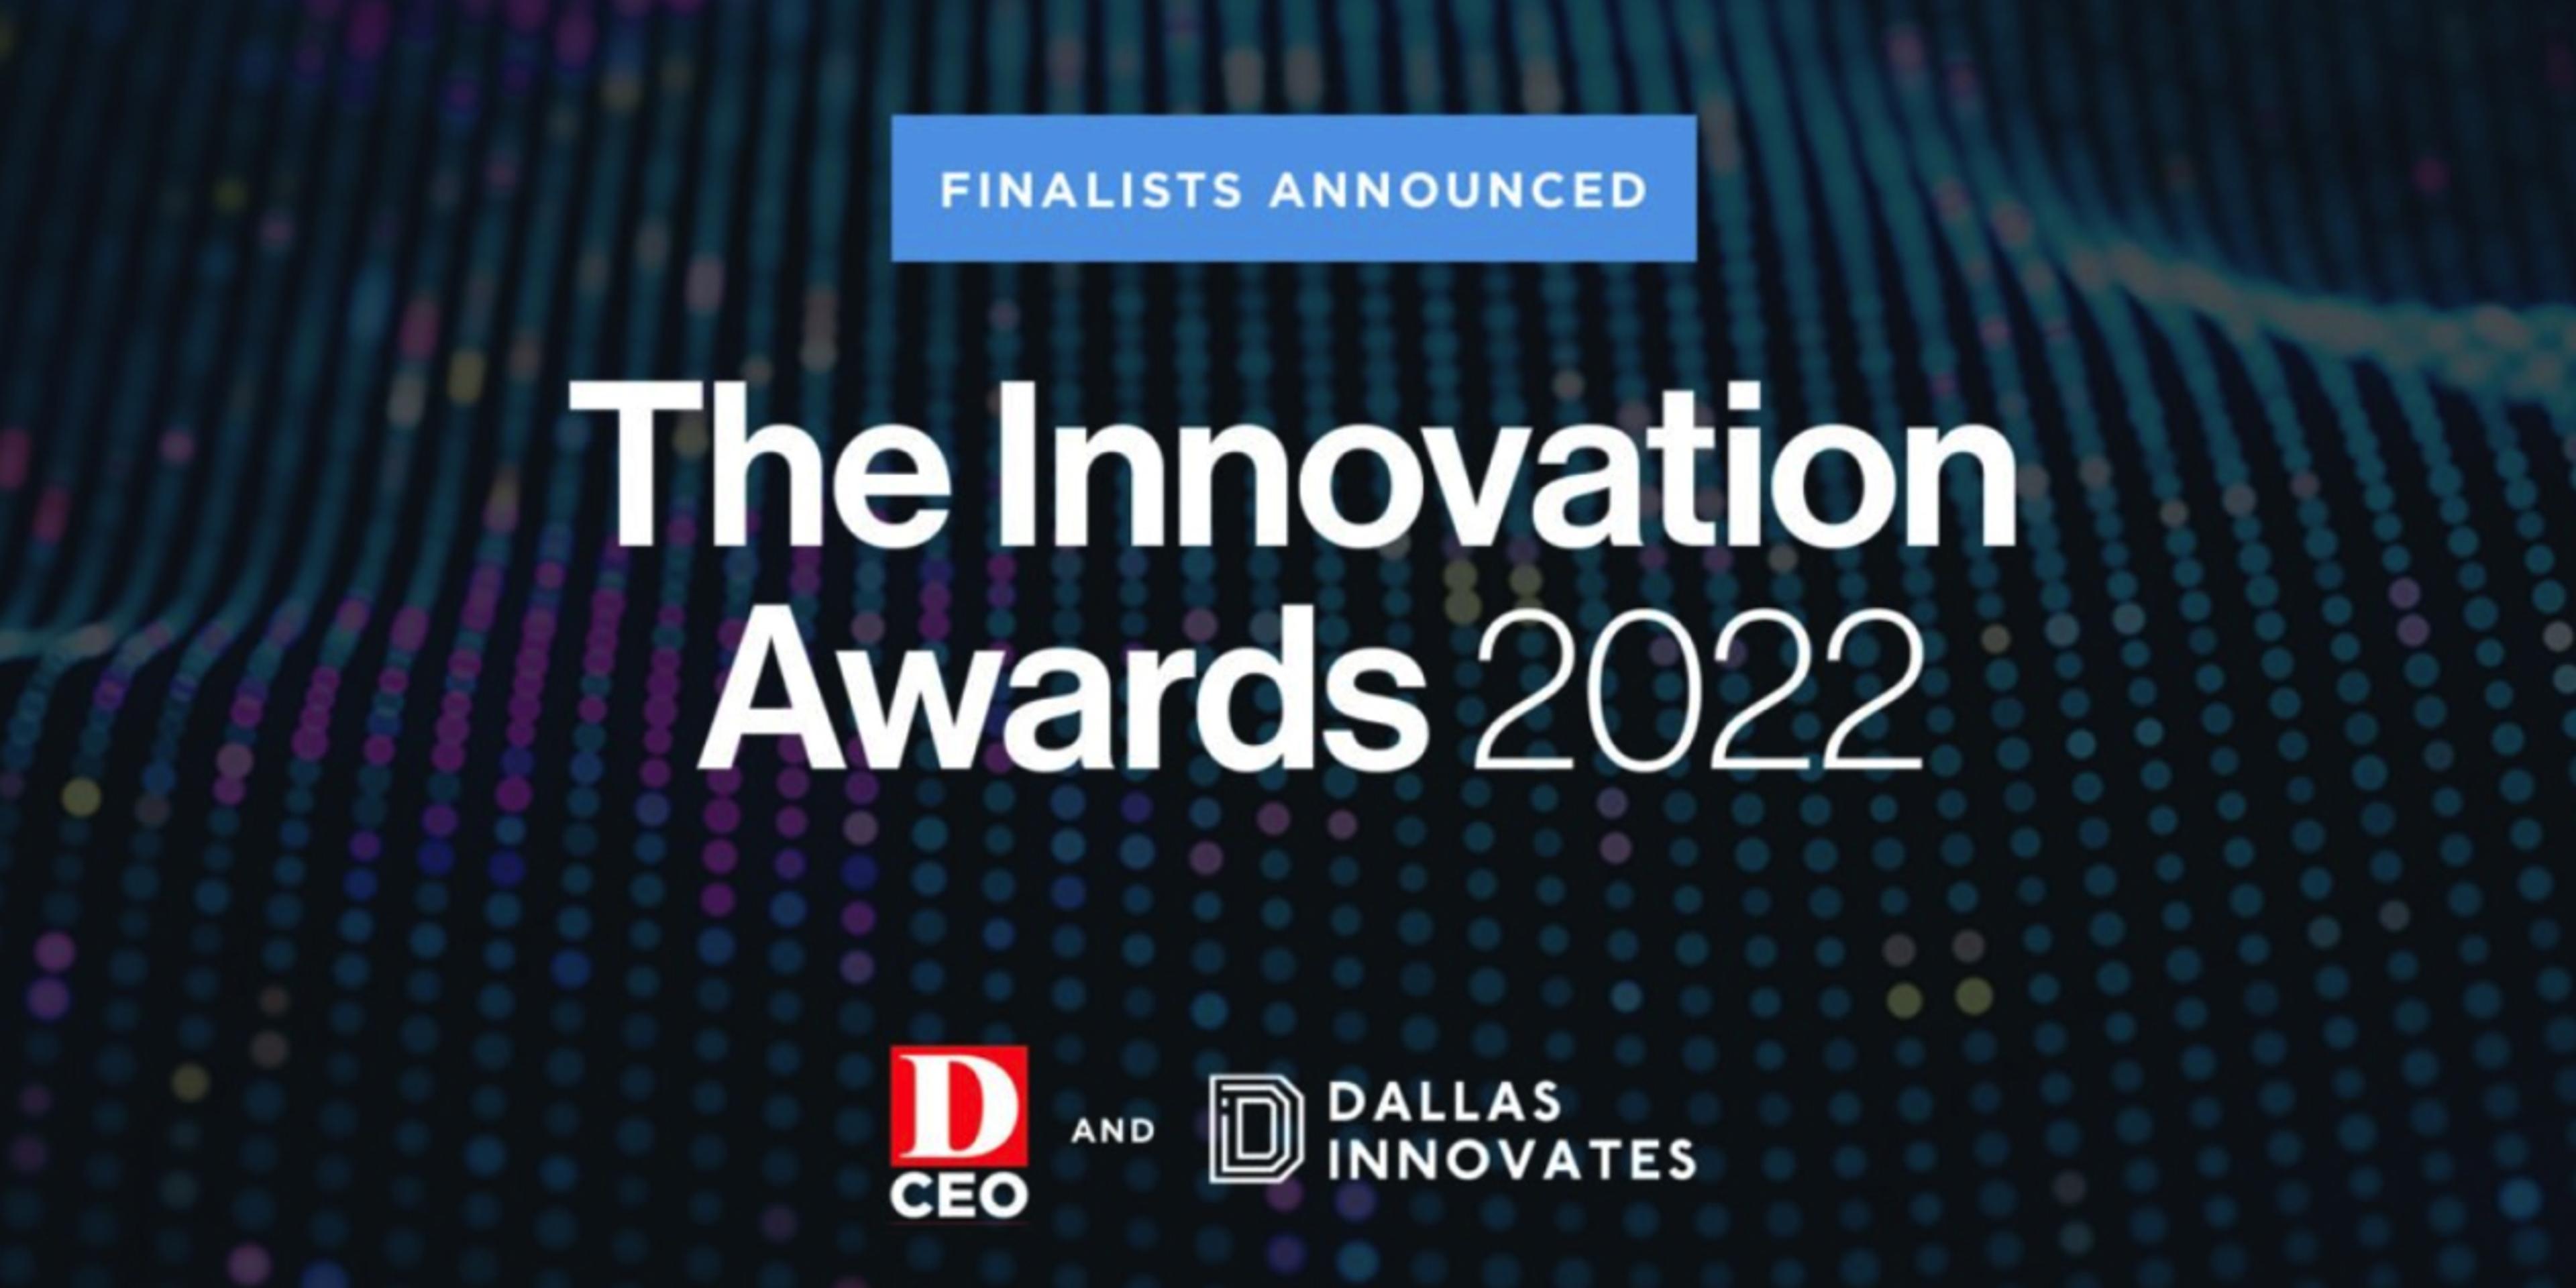 Meet the Finalists: The Innovation Awards 2022, Presented by Dallas Innovates and D CEO Image